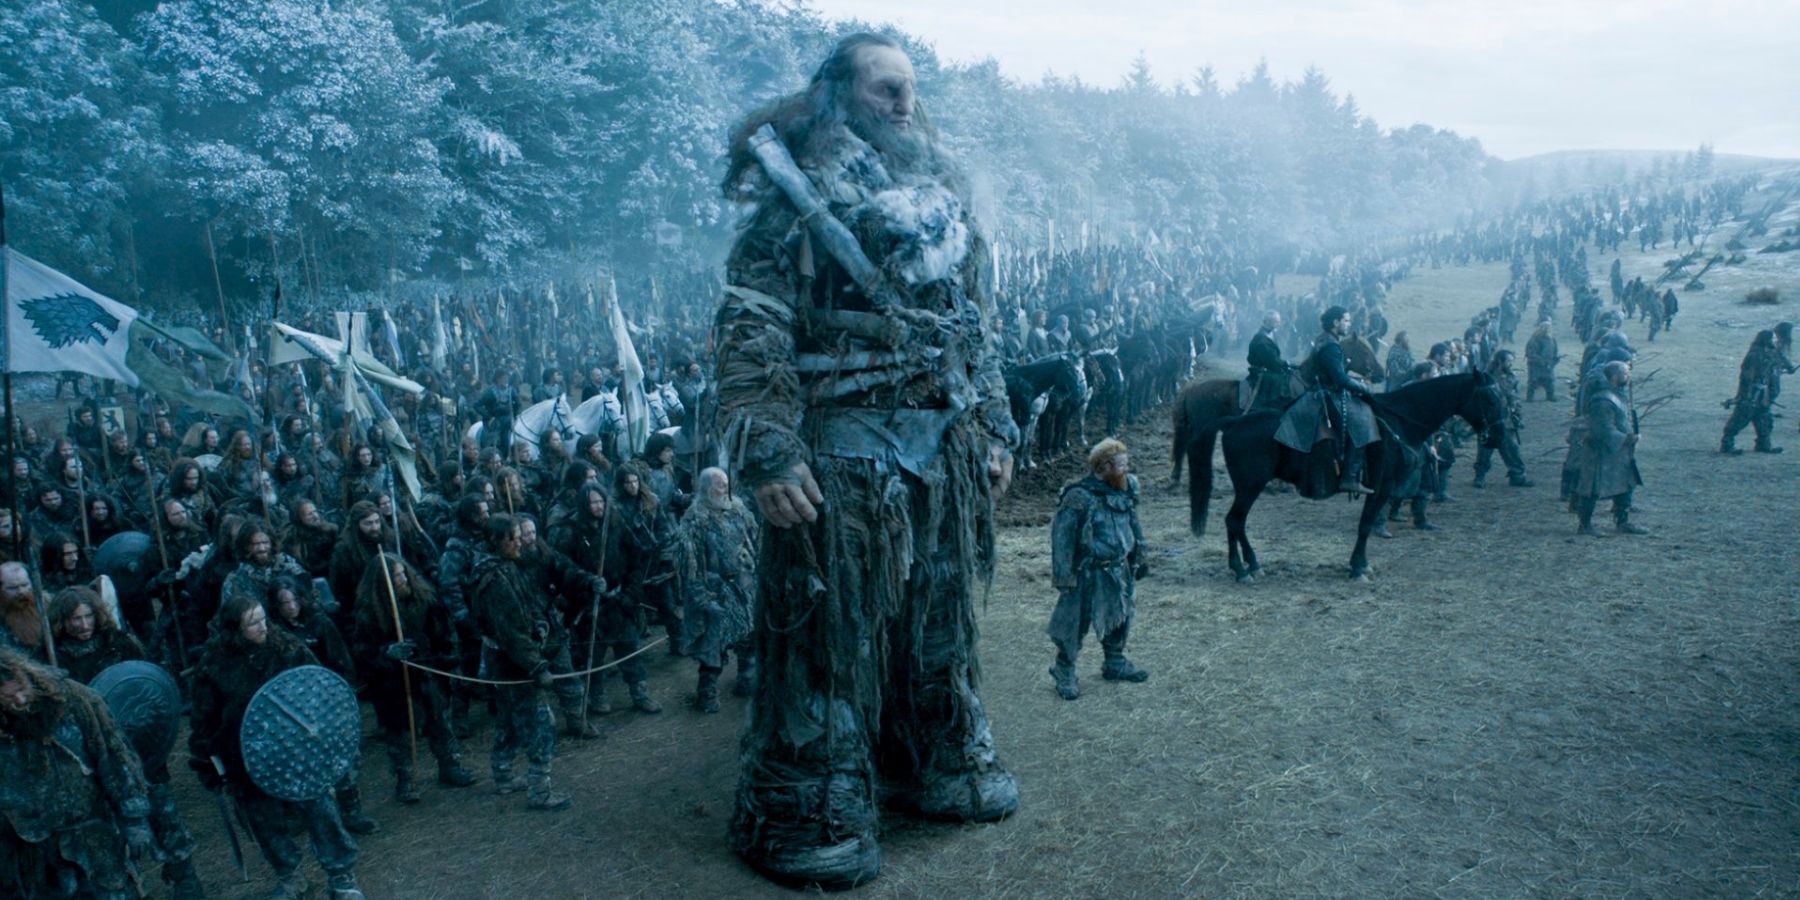 Game of Thrones Giant at the Battle of the Bastards